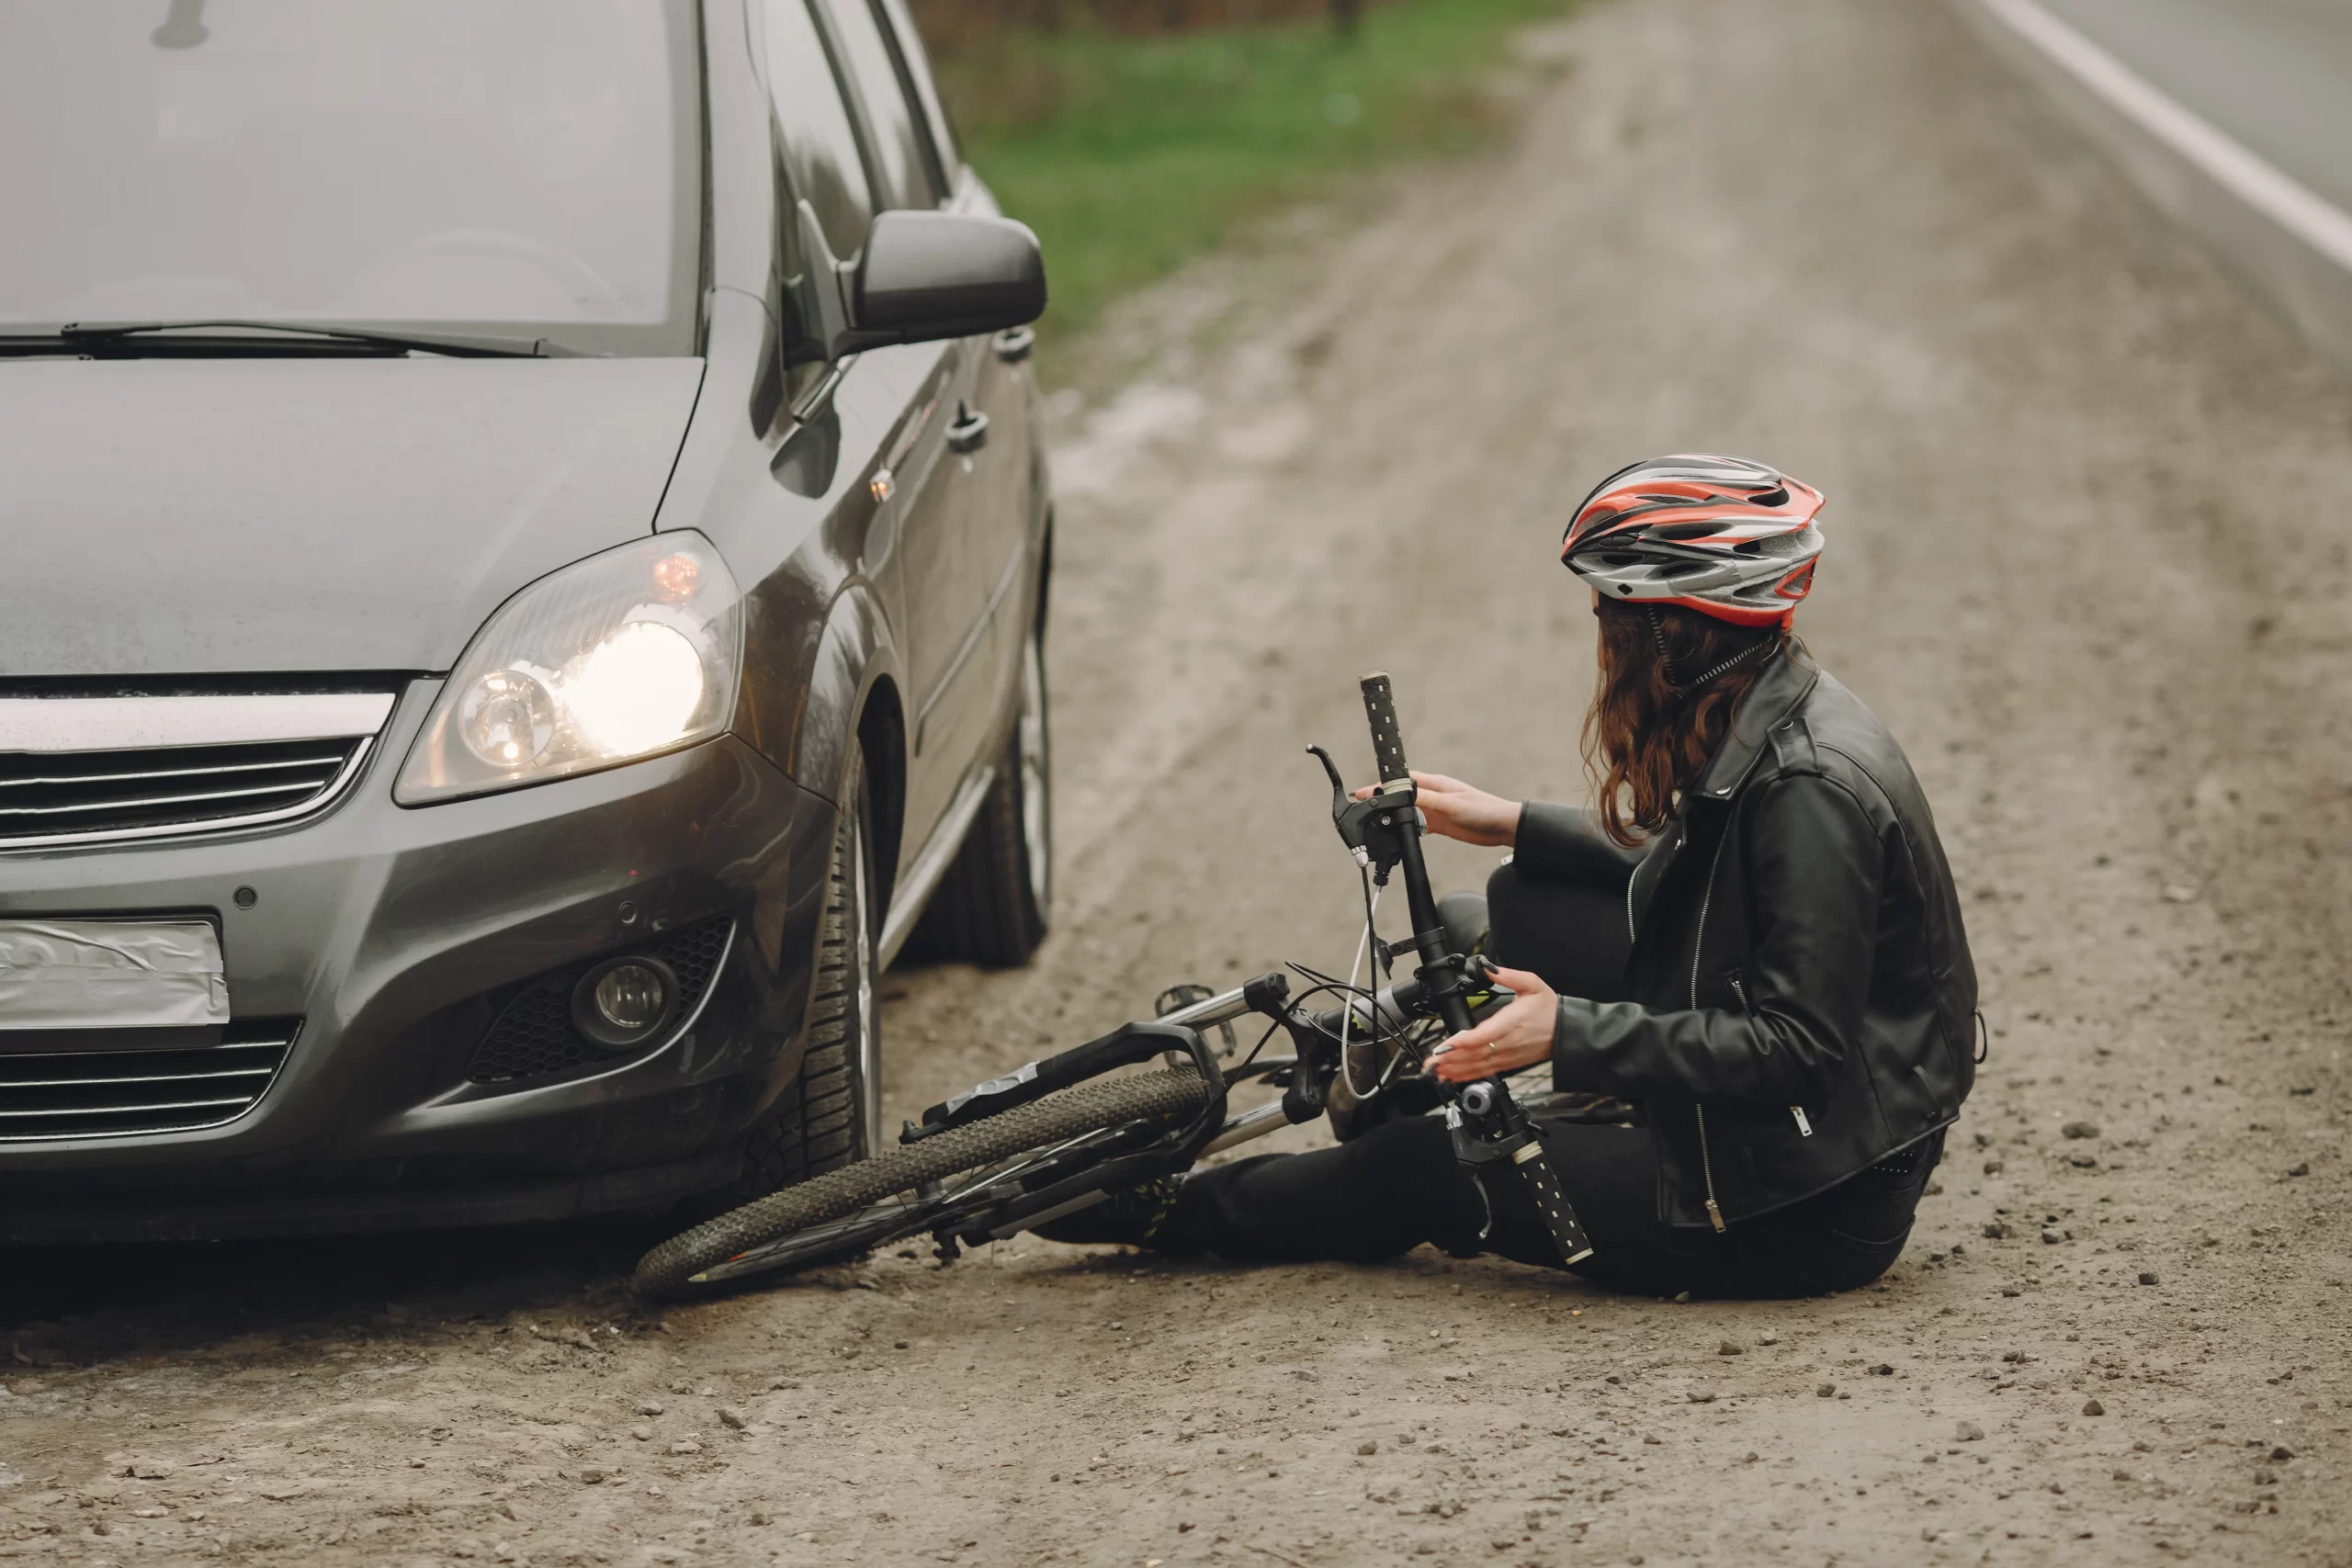 Orange County Bicycle Accident Lawyer